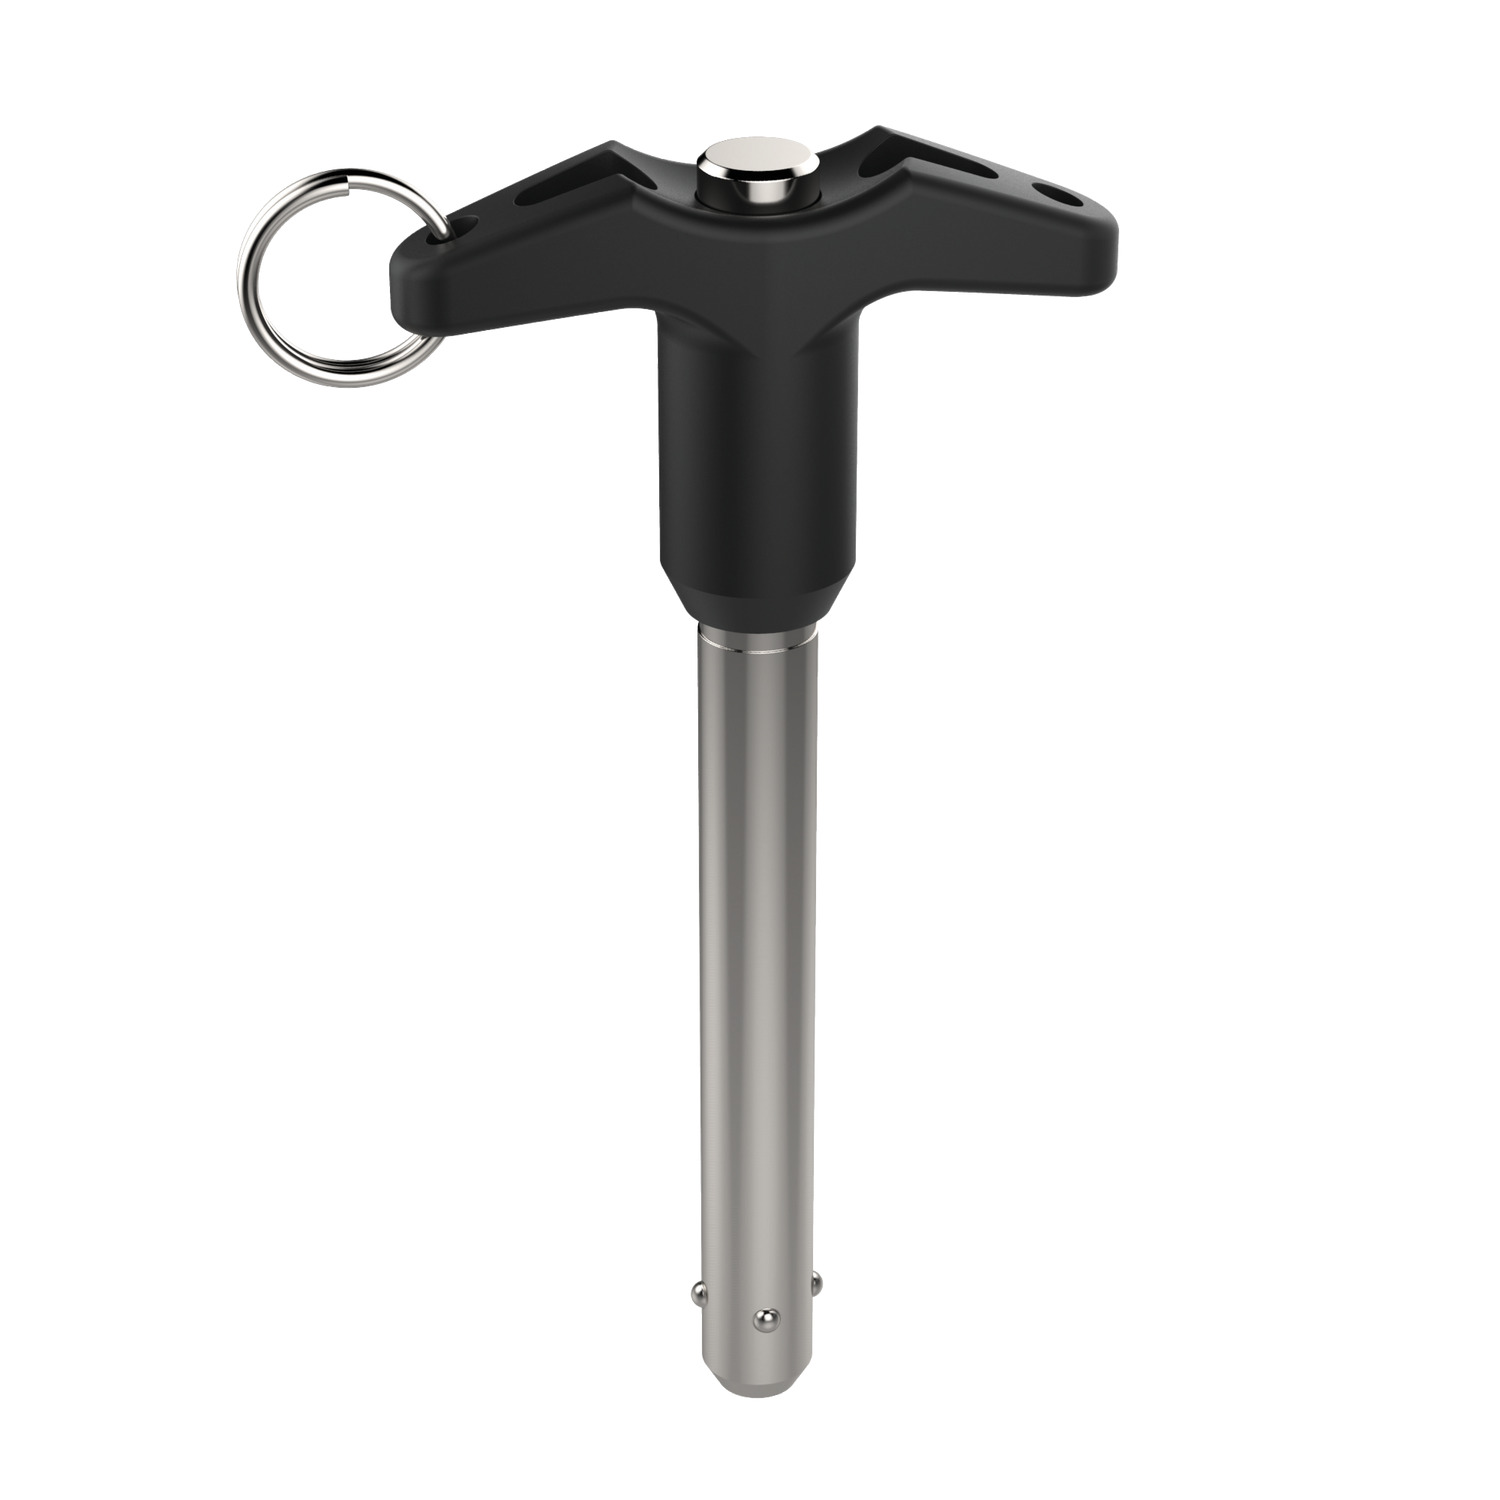 Aviation Pip-Pin - Standard T-Handle Produced to NASM 17985. TA-handled design for excellent handling. For wide range of aviation applications; interior panels, folding tables, ground handling equipment.